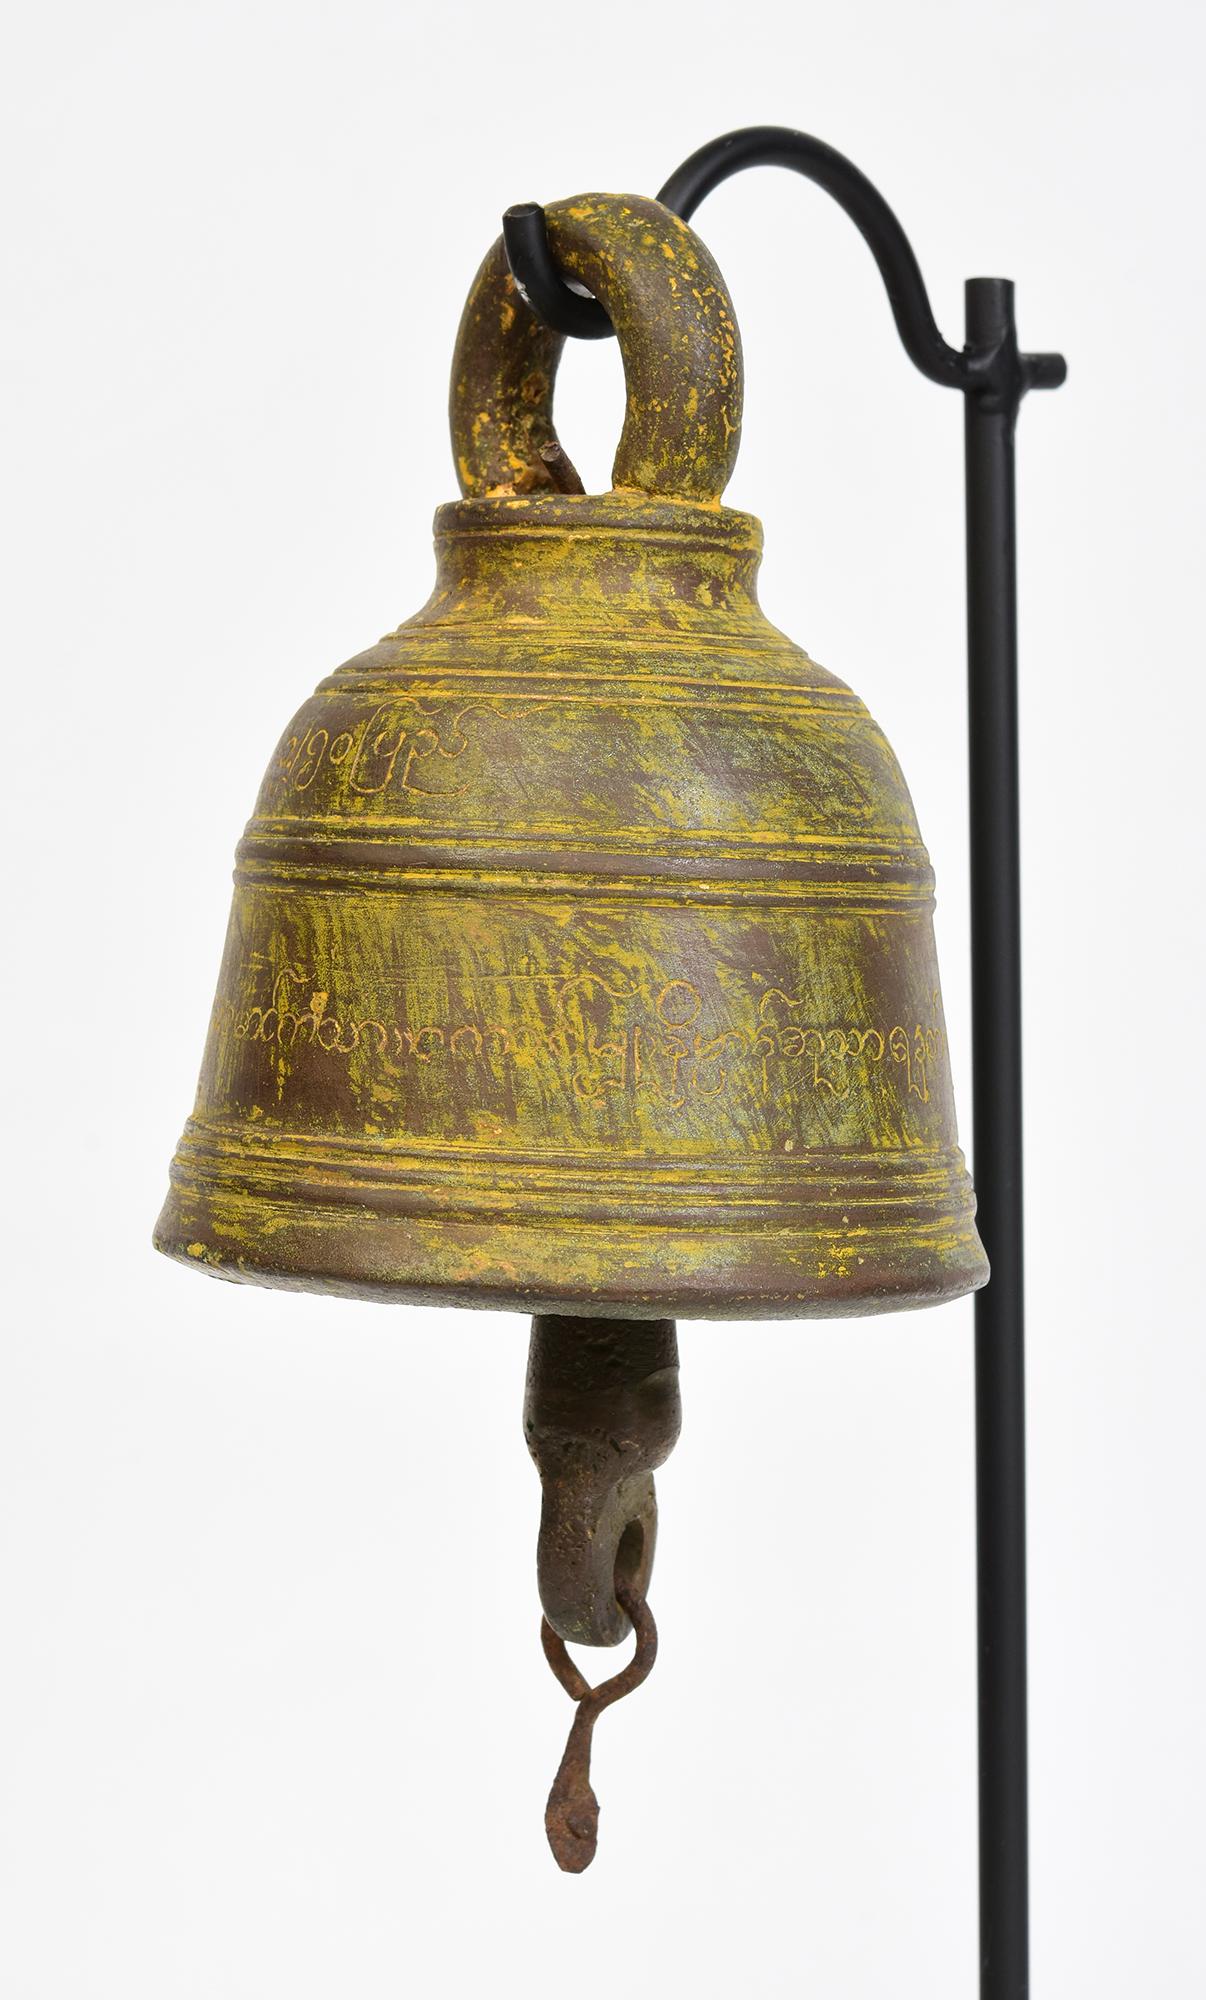 Antique Burmese bronze bell with clapper inside with stand.

Age: Burma, 19th Century
Size of bell only: Height 12.5 C.M. / Width 9.4 C.M.
Height including stand: 34.5 C.M.
Condition: Nice condition overall (some expected degradation due to its